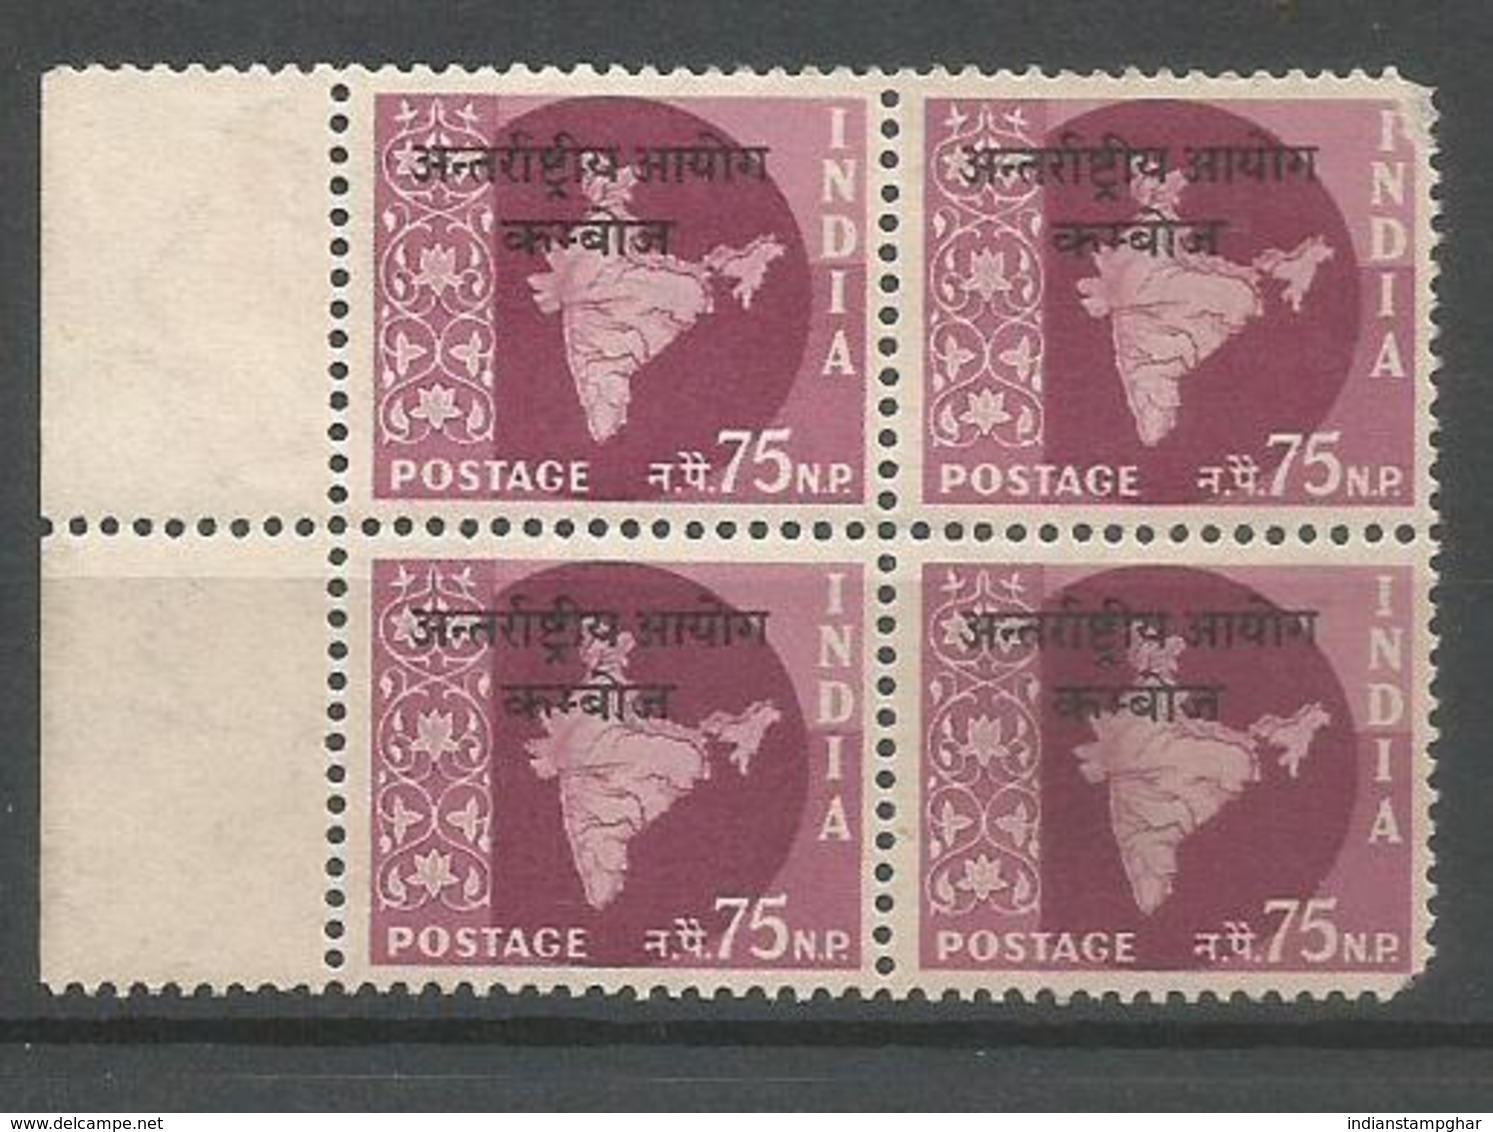 Cambodia Opvt. On 75np Map, Block Of 4,MNH 1962 Star Wmk, Military Stamps, As Per Scan - Military Service Stamp